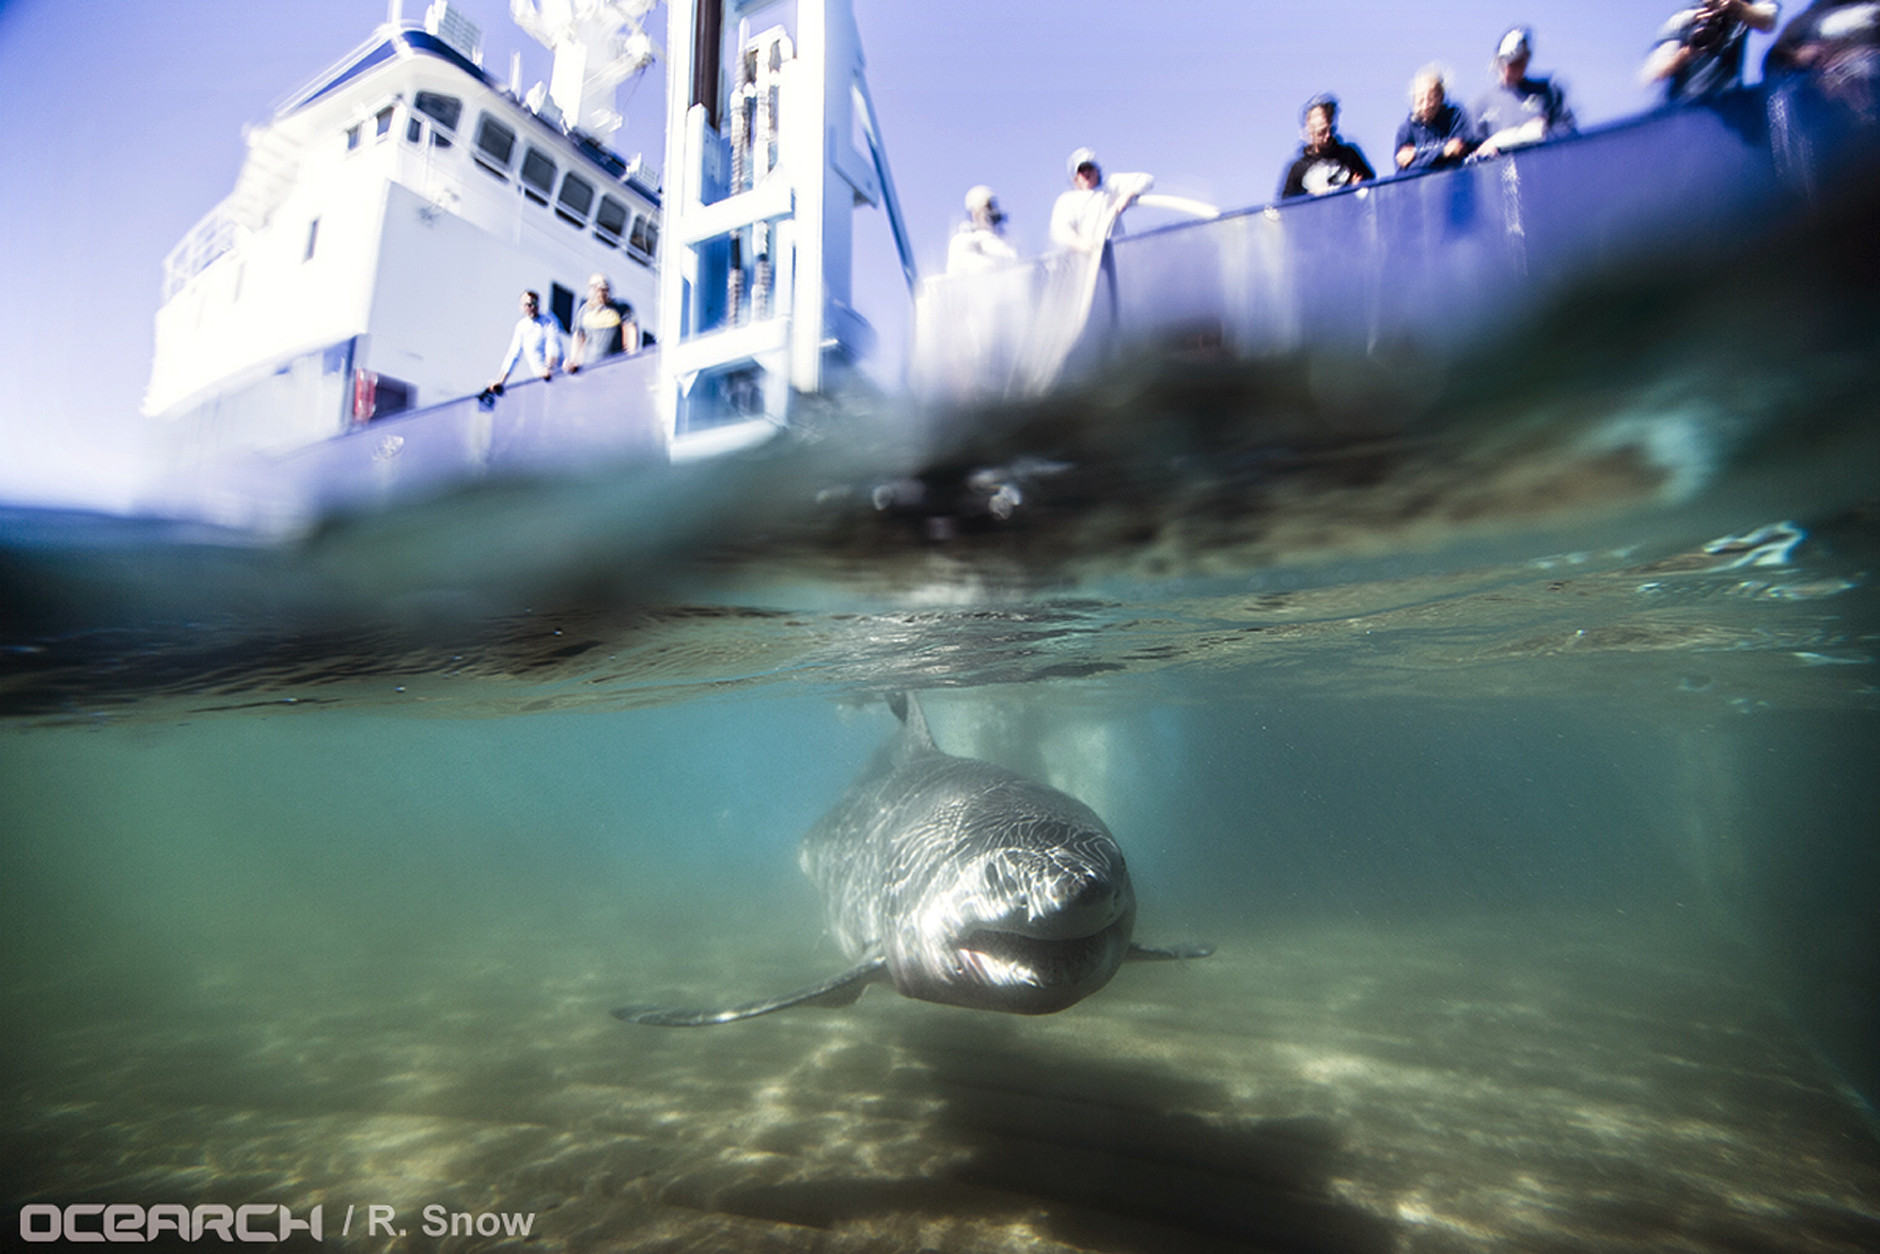 In this Aug. 23, 2016 photo provided by OCEARCH, a juvenile male great white shark named Paumanok swims away after researchers tagged and sampled him off the point of Montauk, N.Y. The expedition said it has confirmed that waters between southern Massachusetts and New York's Long Island point are a “nursery” where the powerful predators spend much of the first year of their lives feeding and growing. (Robert Snow/OCEARCH via AP)